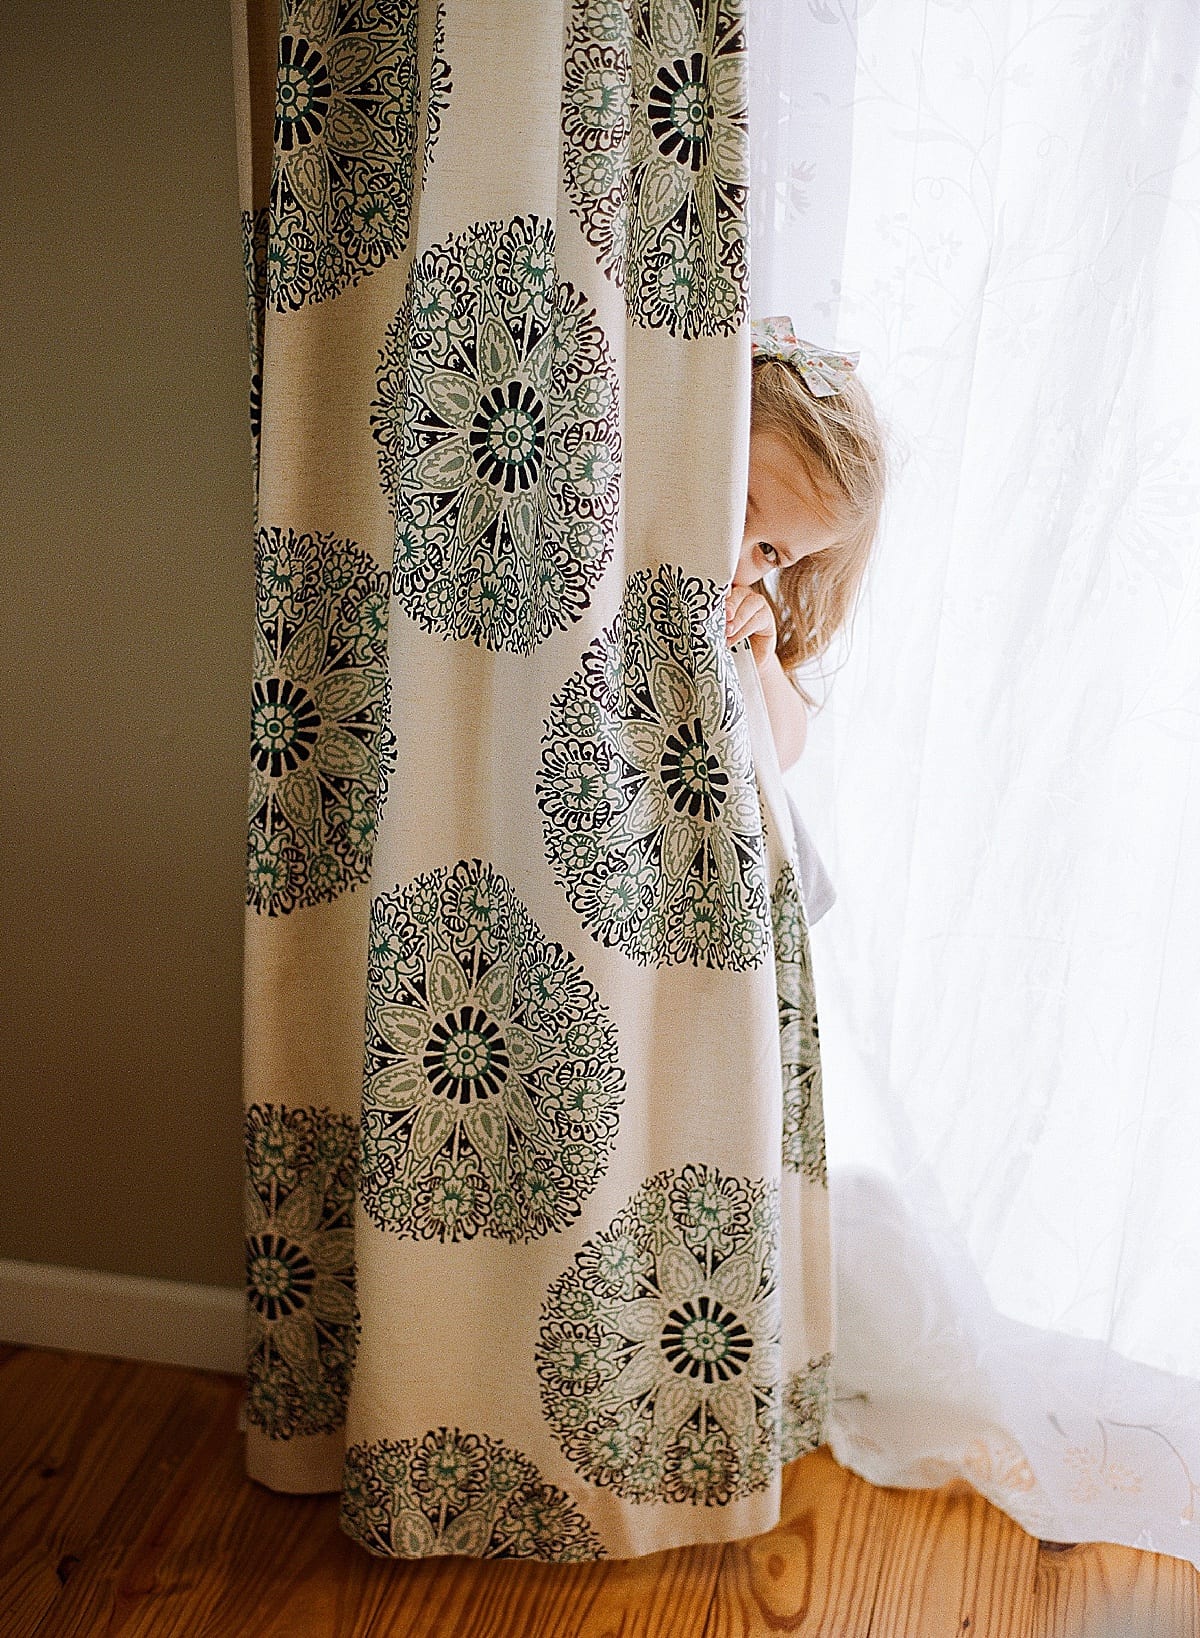 little girl peeking from behind the curtain photo